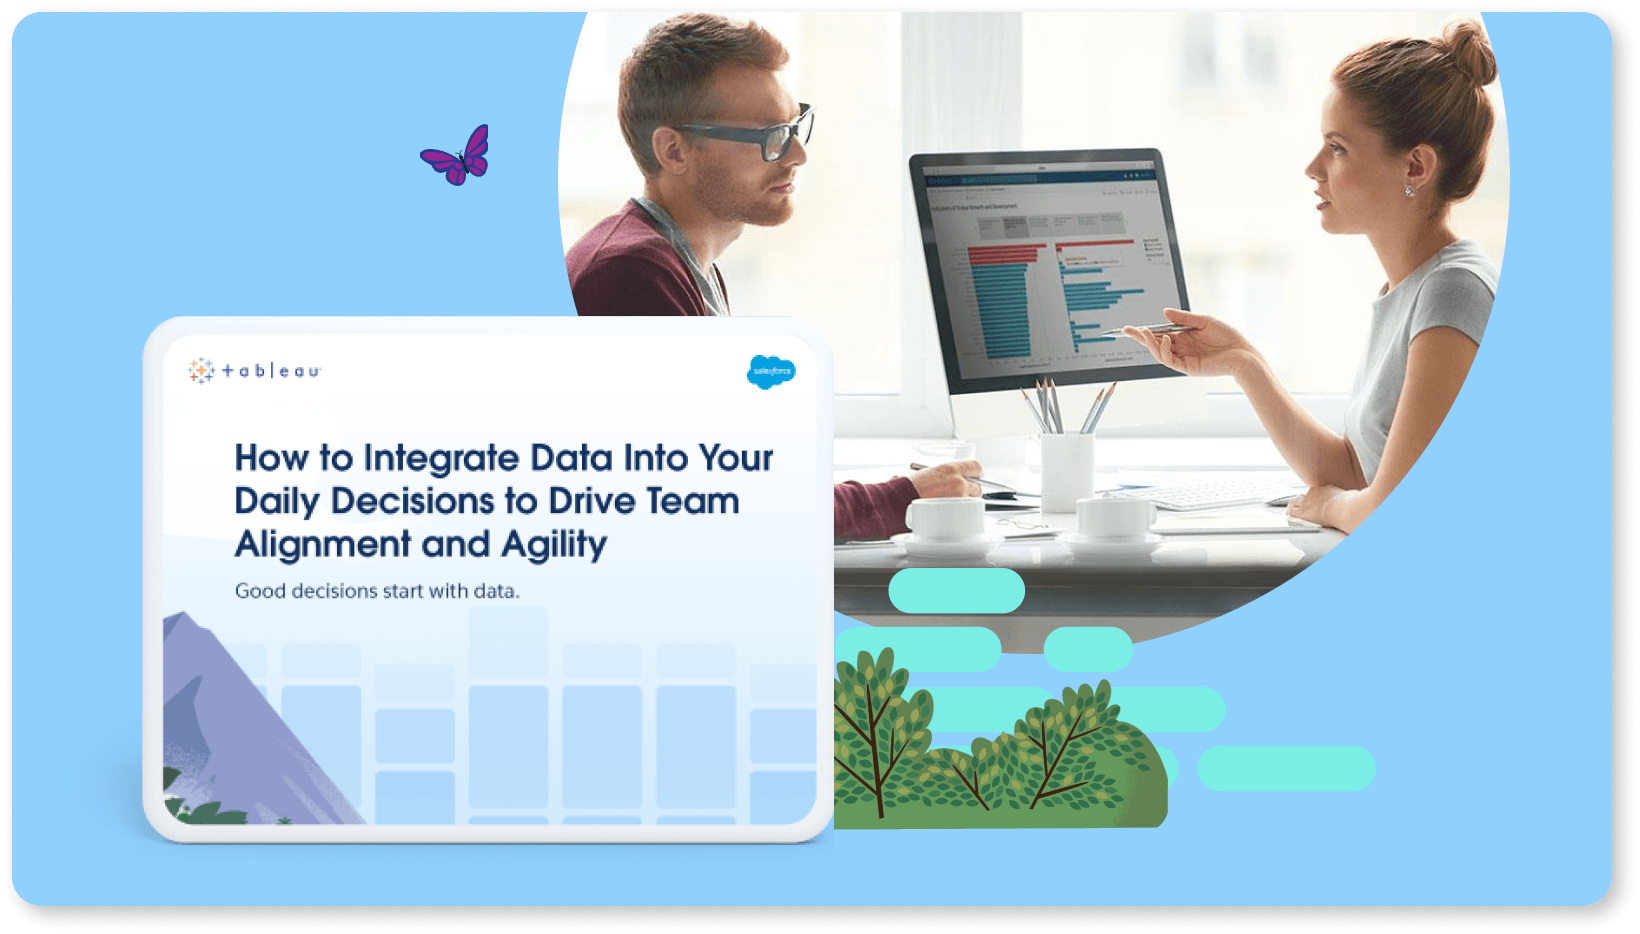 Navegue para How to Integrate Data Into Your Daily Decisions to Drive Team Alignment and Agility